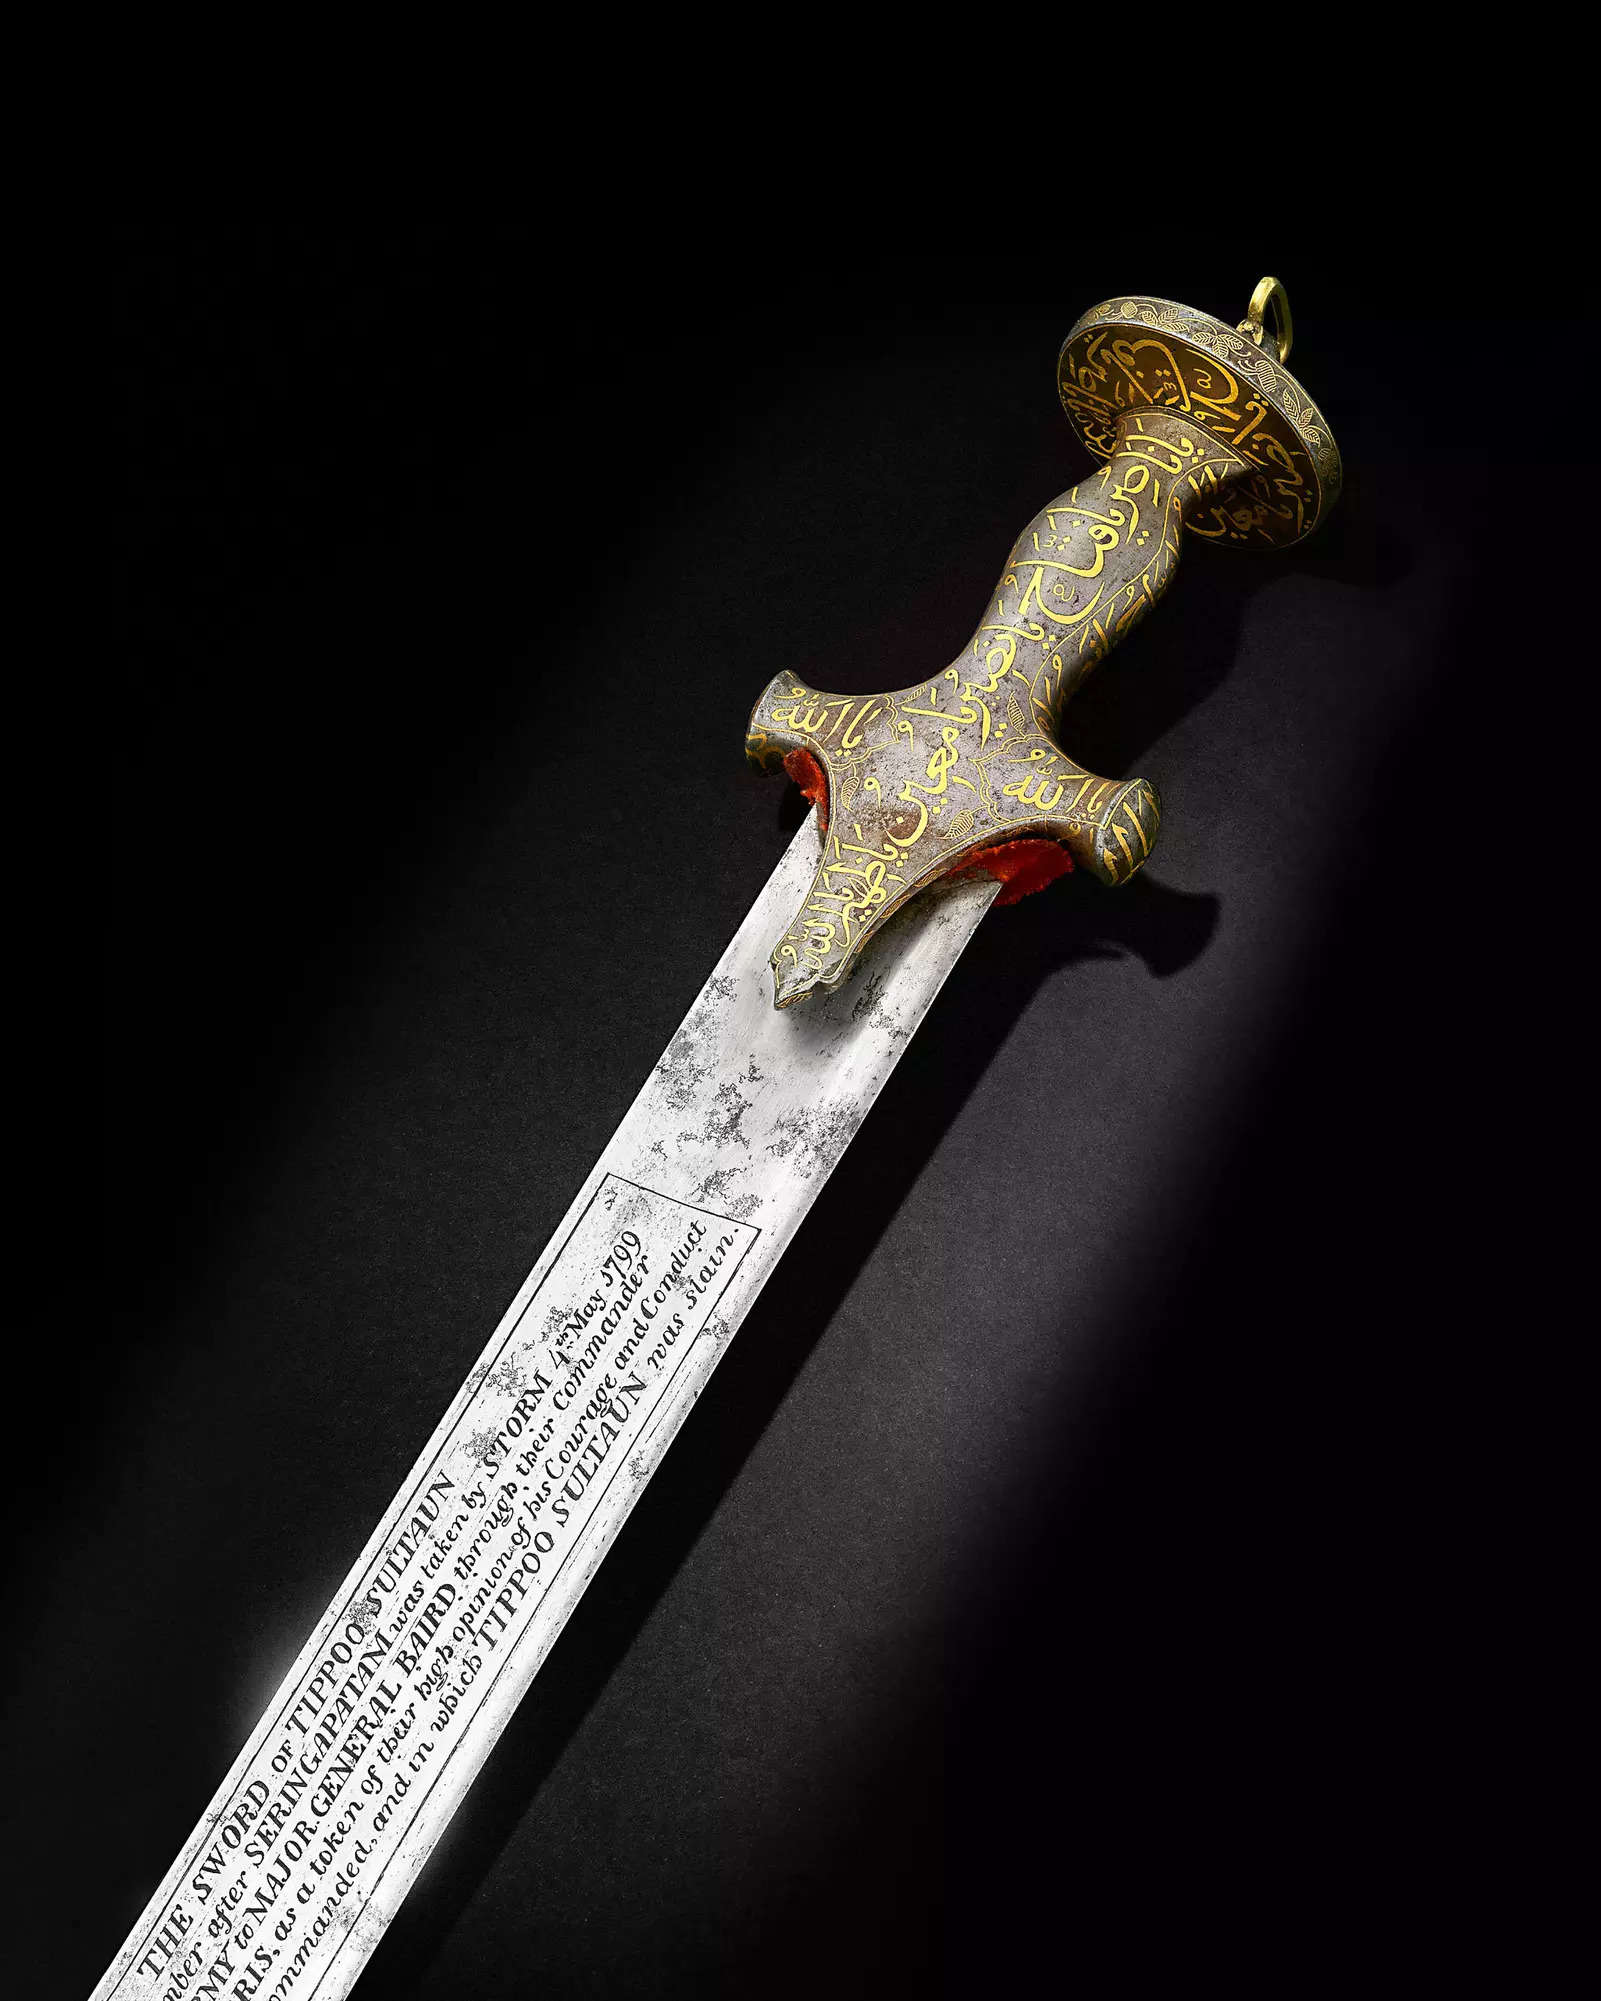 Tipu Sultan's bedchamber sword creates new auction record in UK